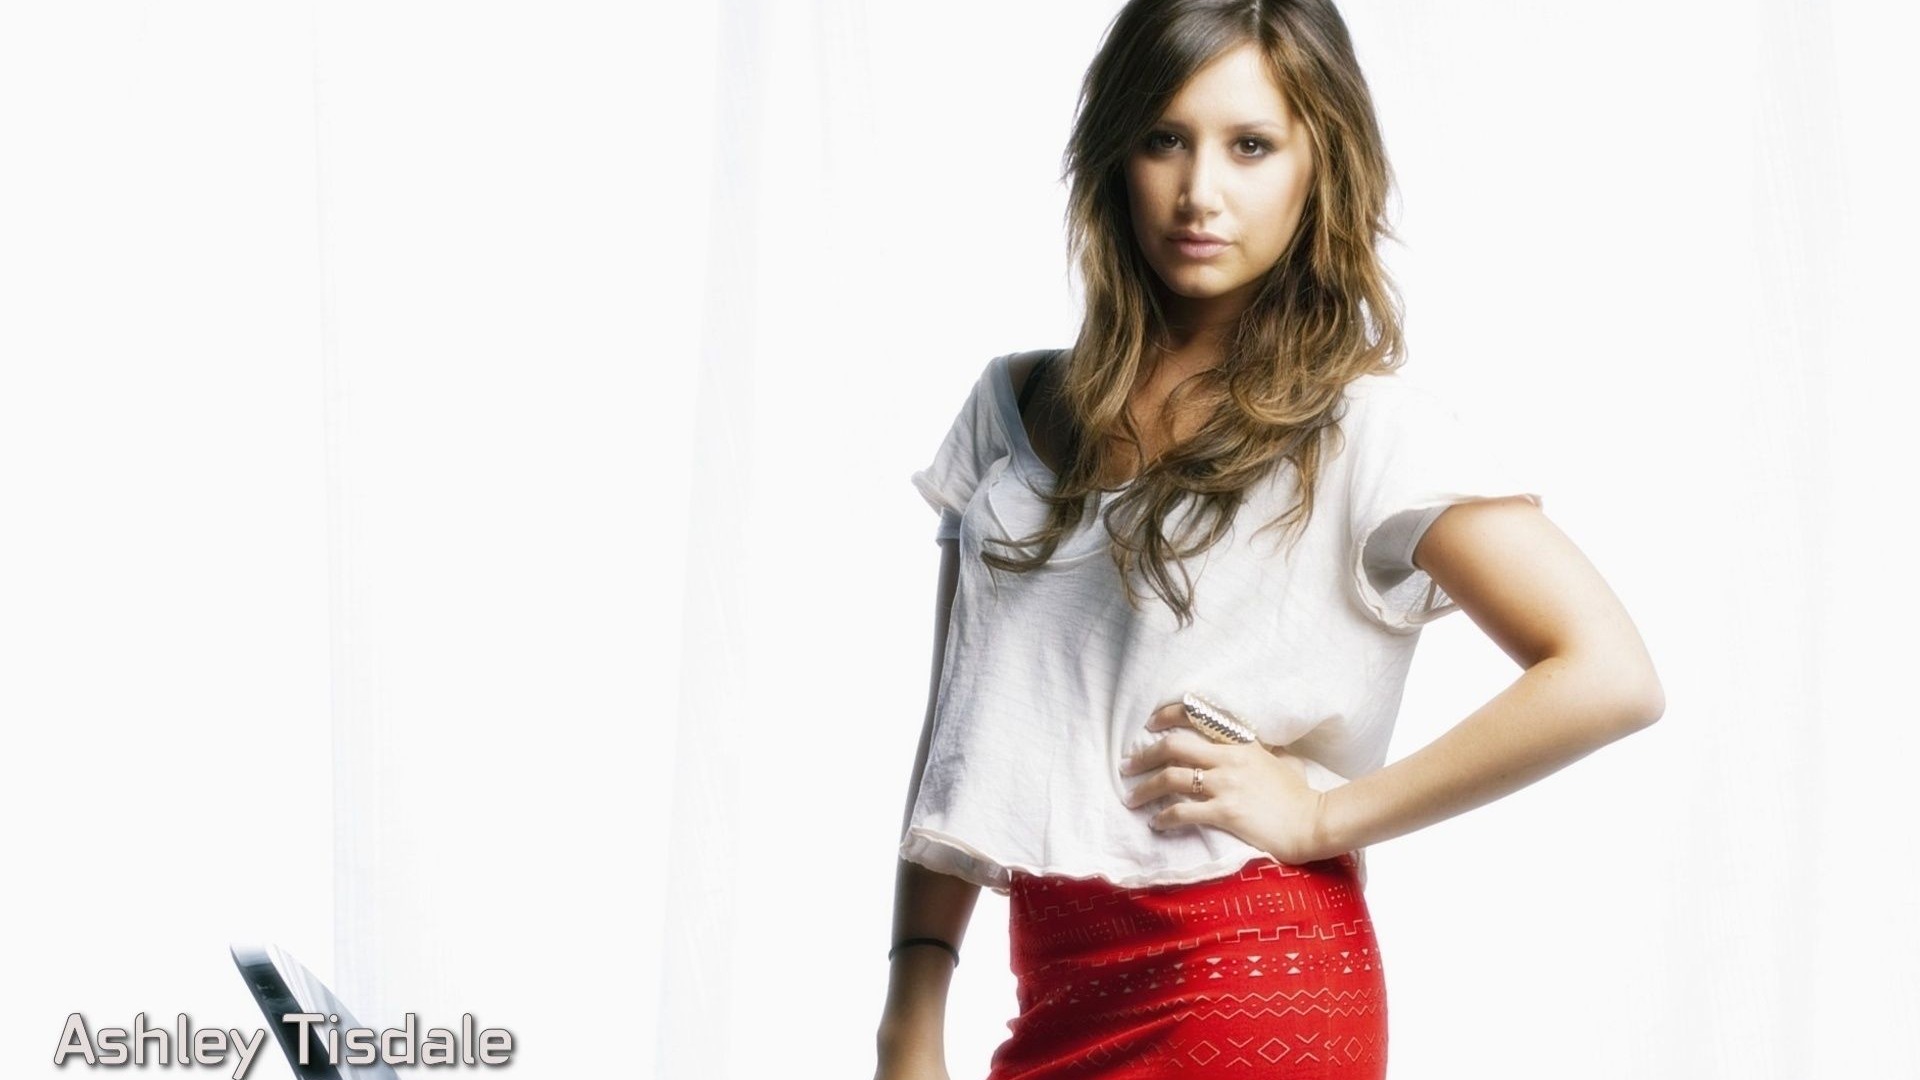 Ashley Tisdale #007 - 1920x1080 Wallpapers Pictures Photos Images